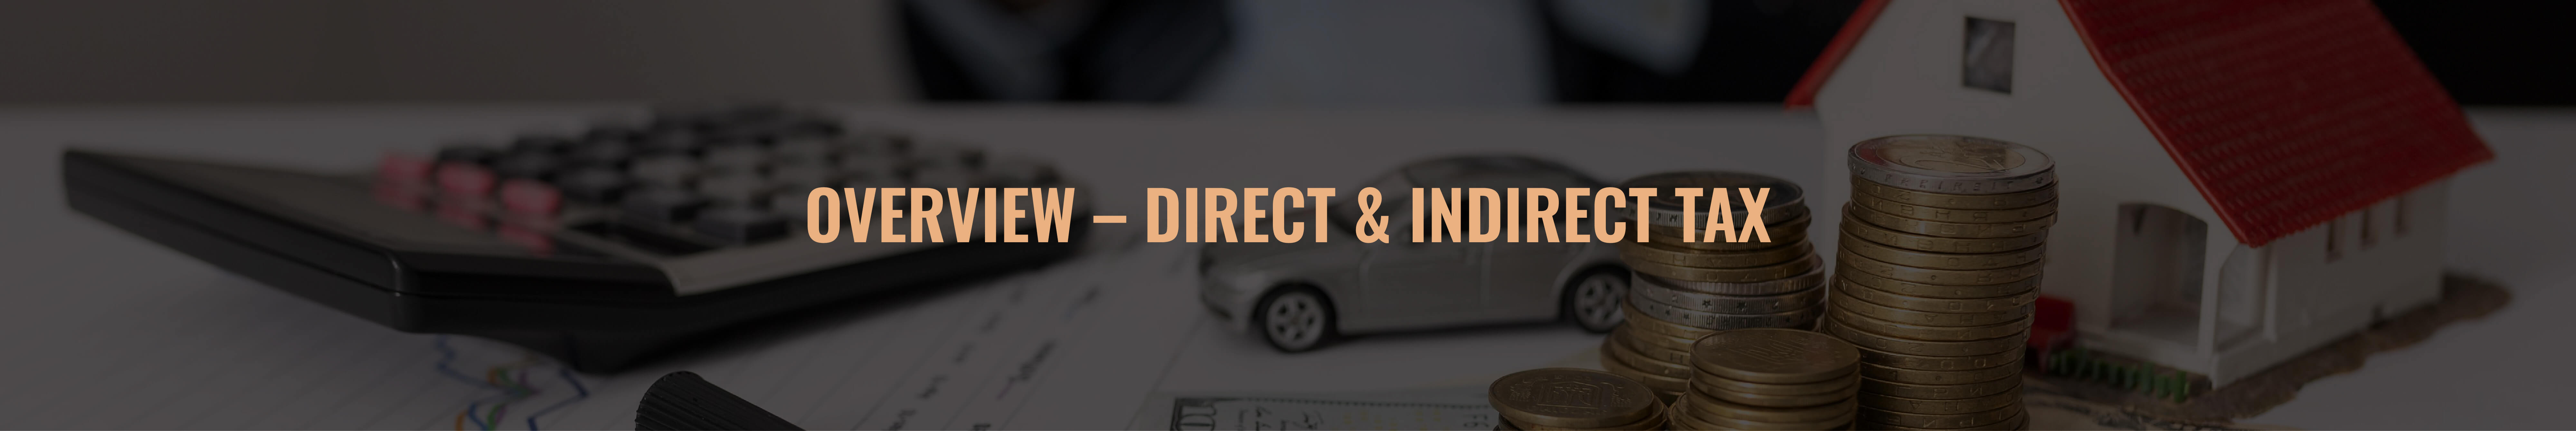 Direct & Indirect Tax - Overview